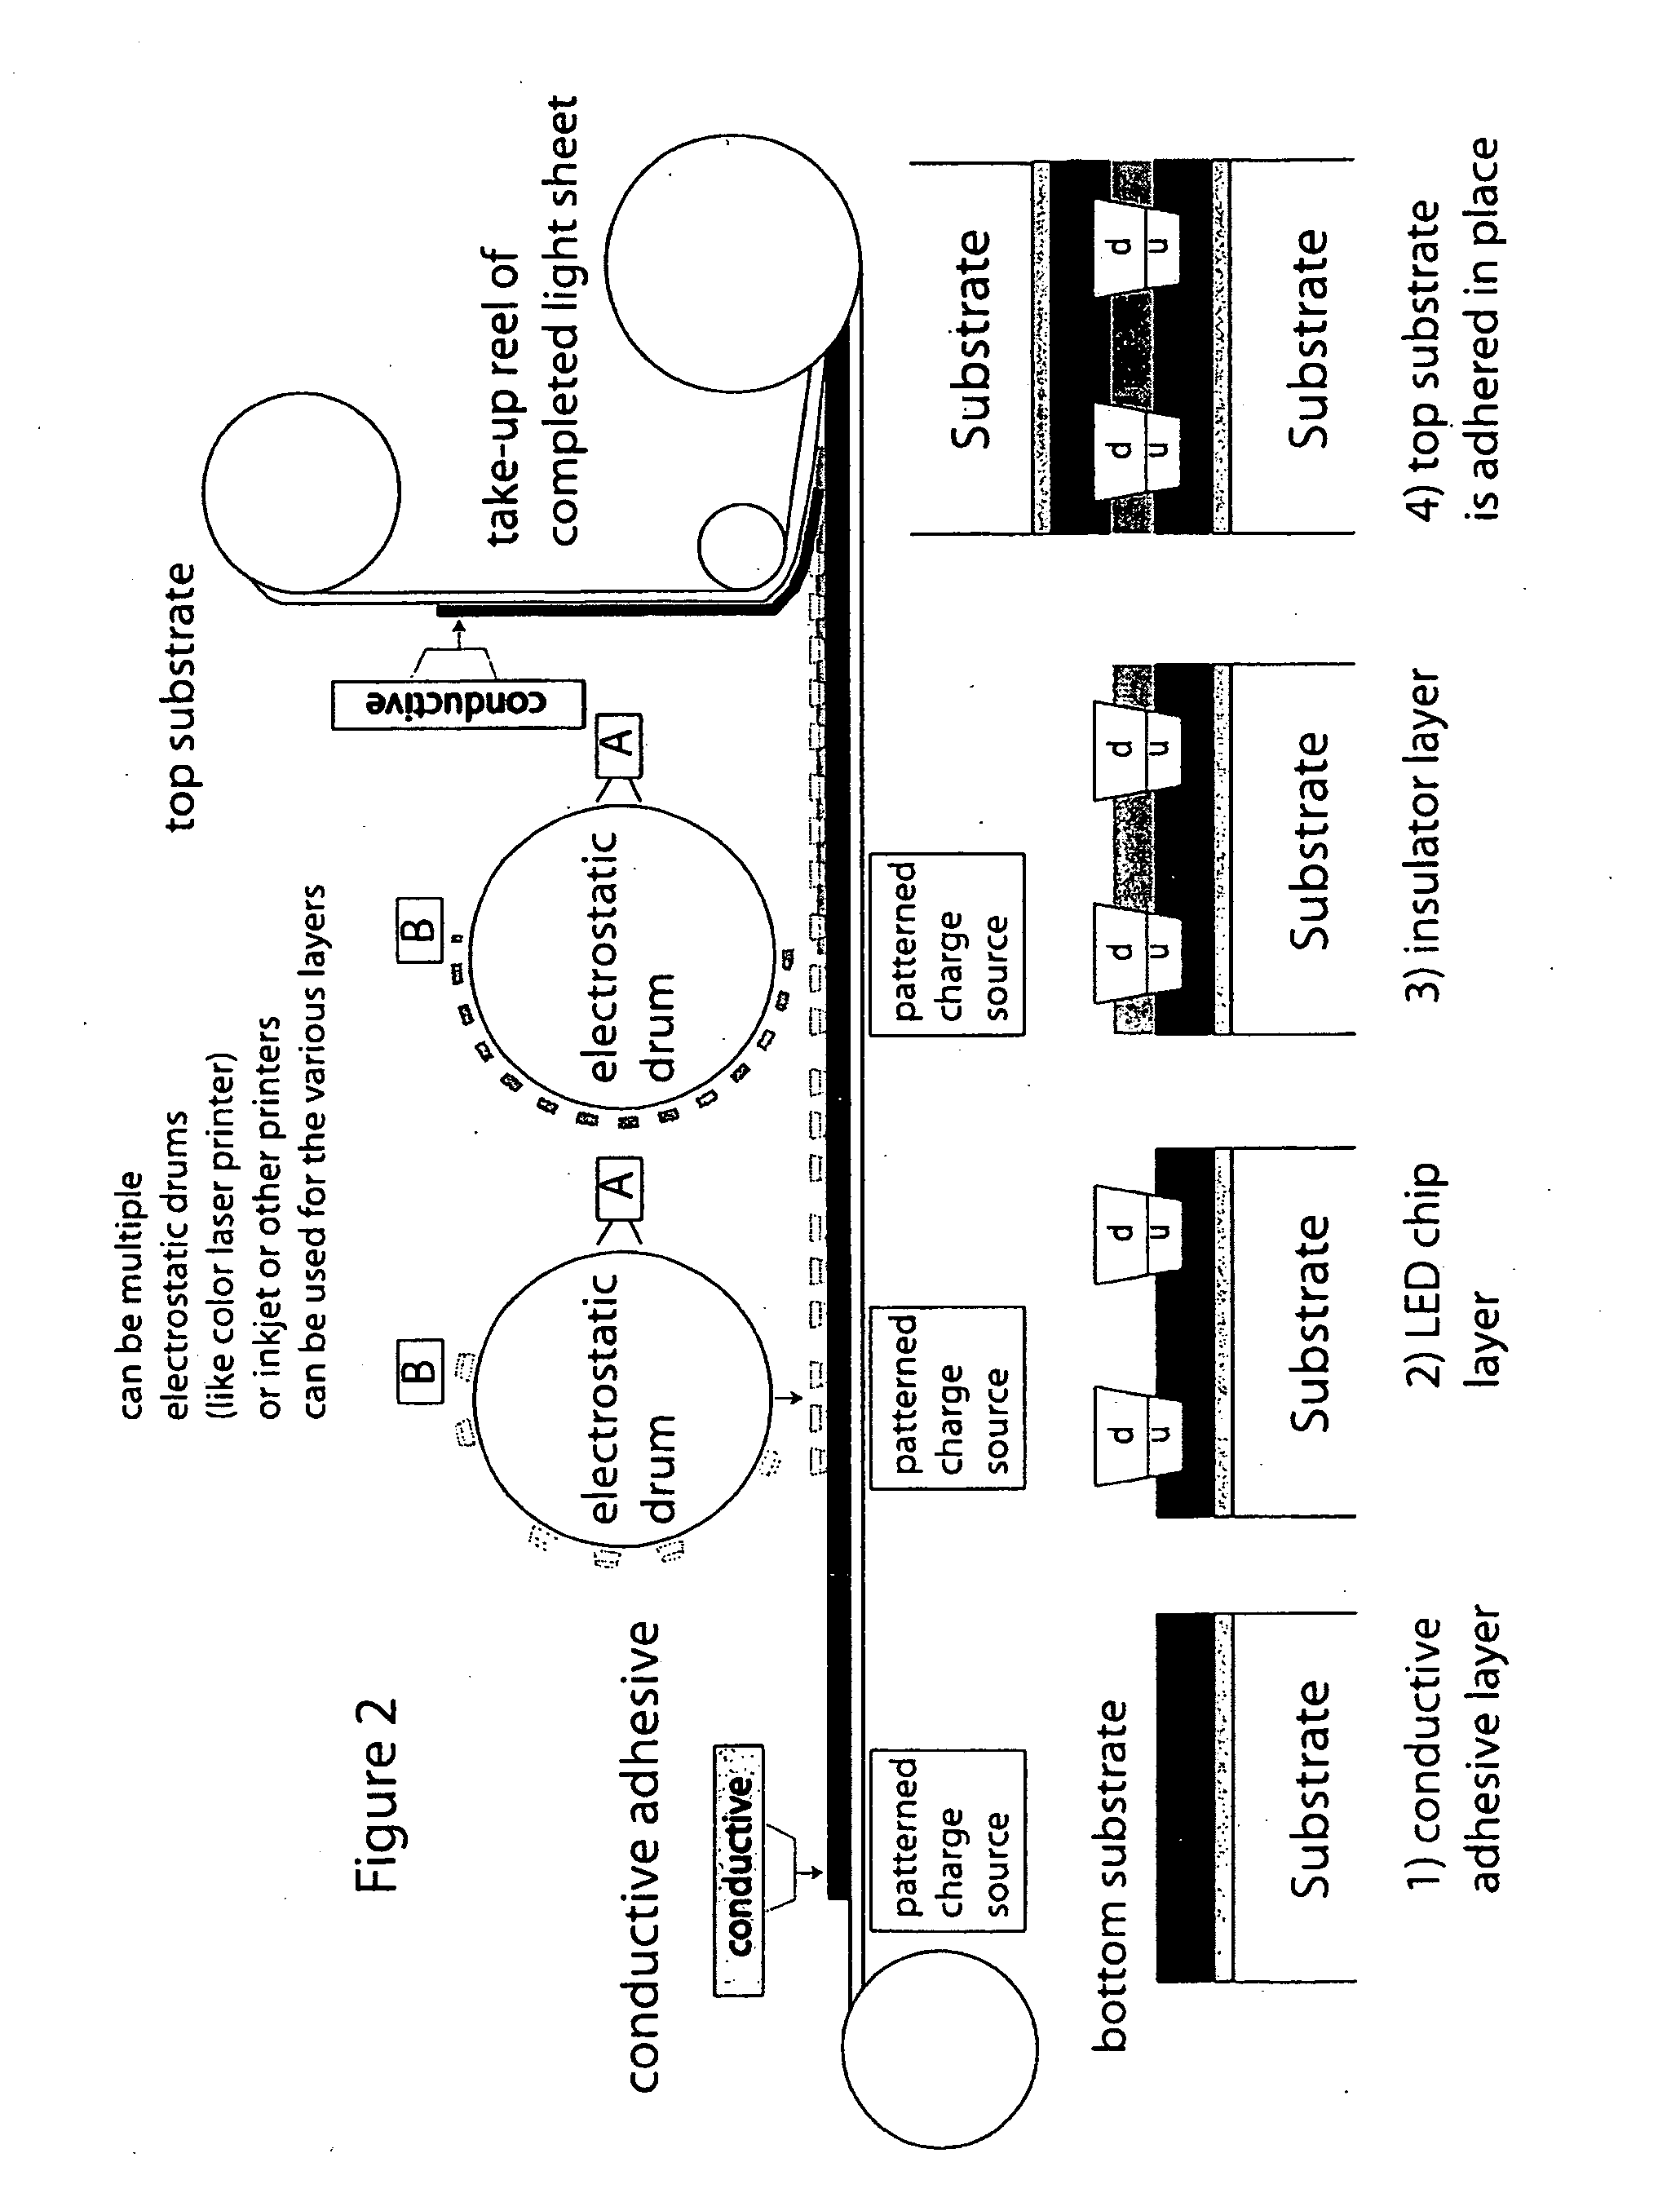 Roll-to-roll fabricated light sheet and encapsulated semiconductor circuit devices